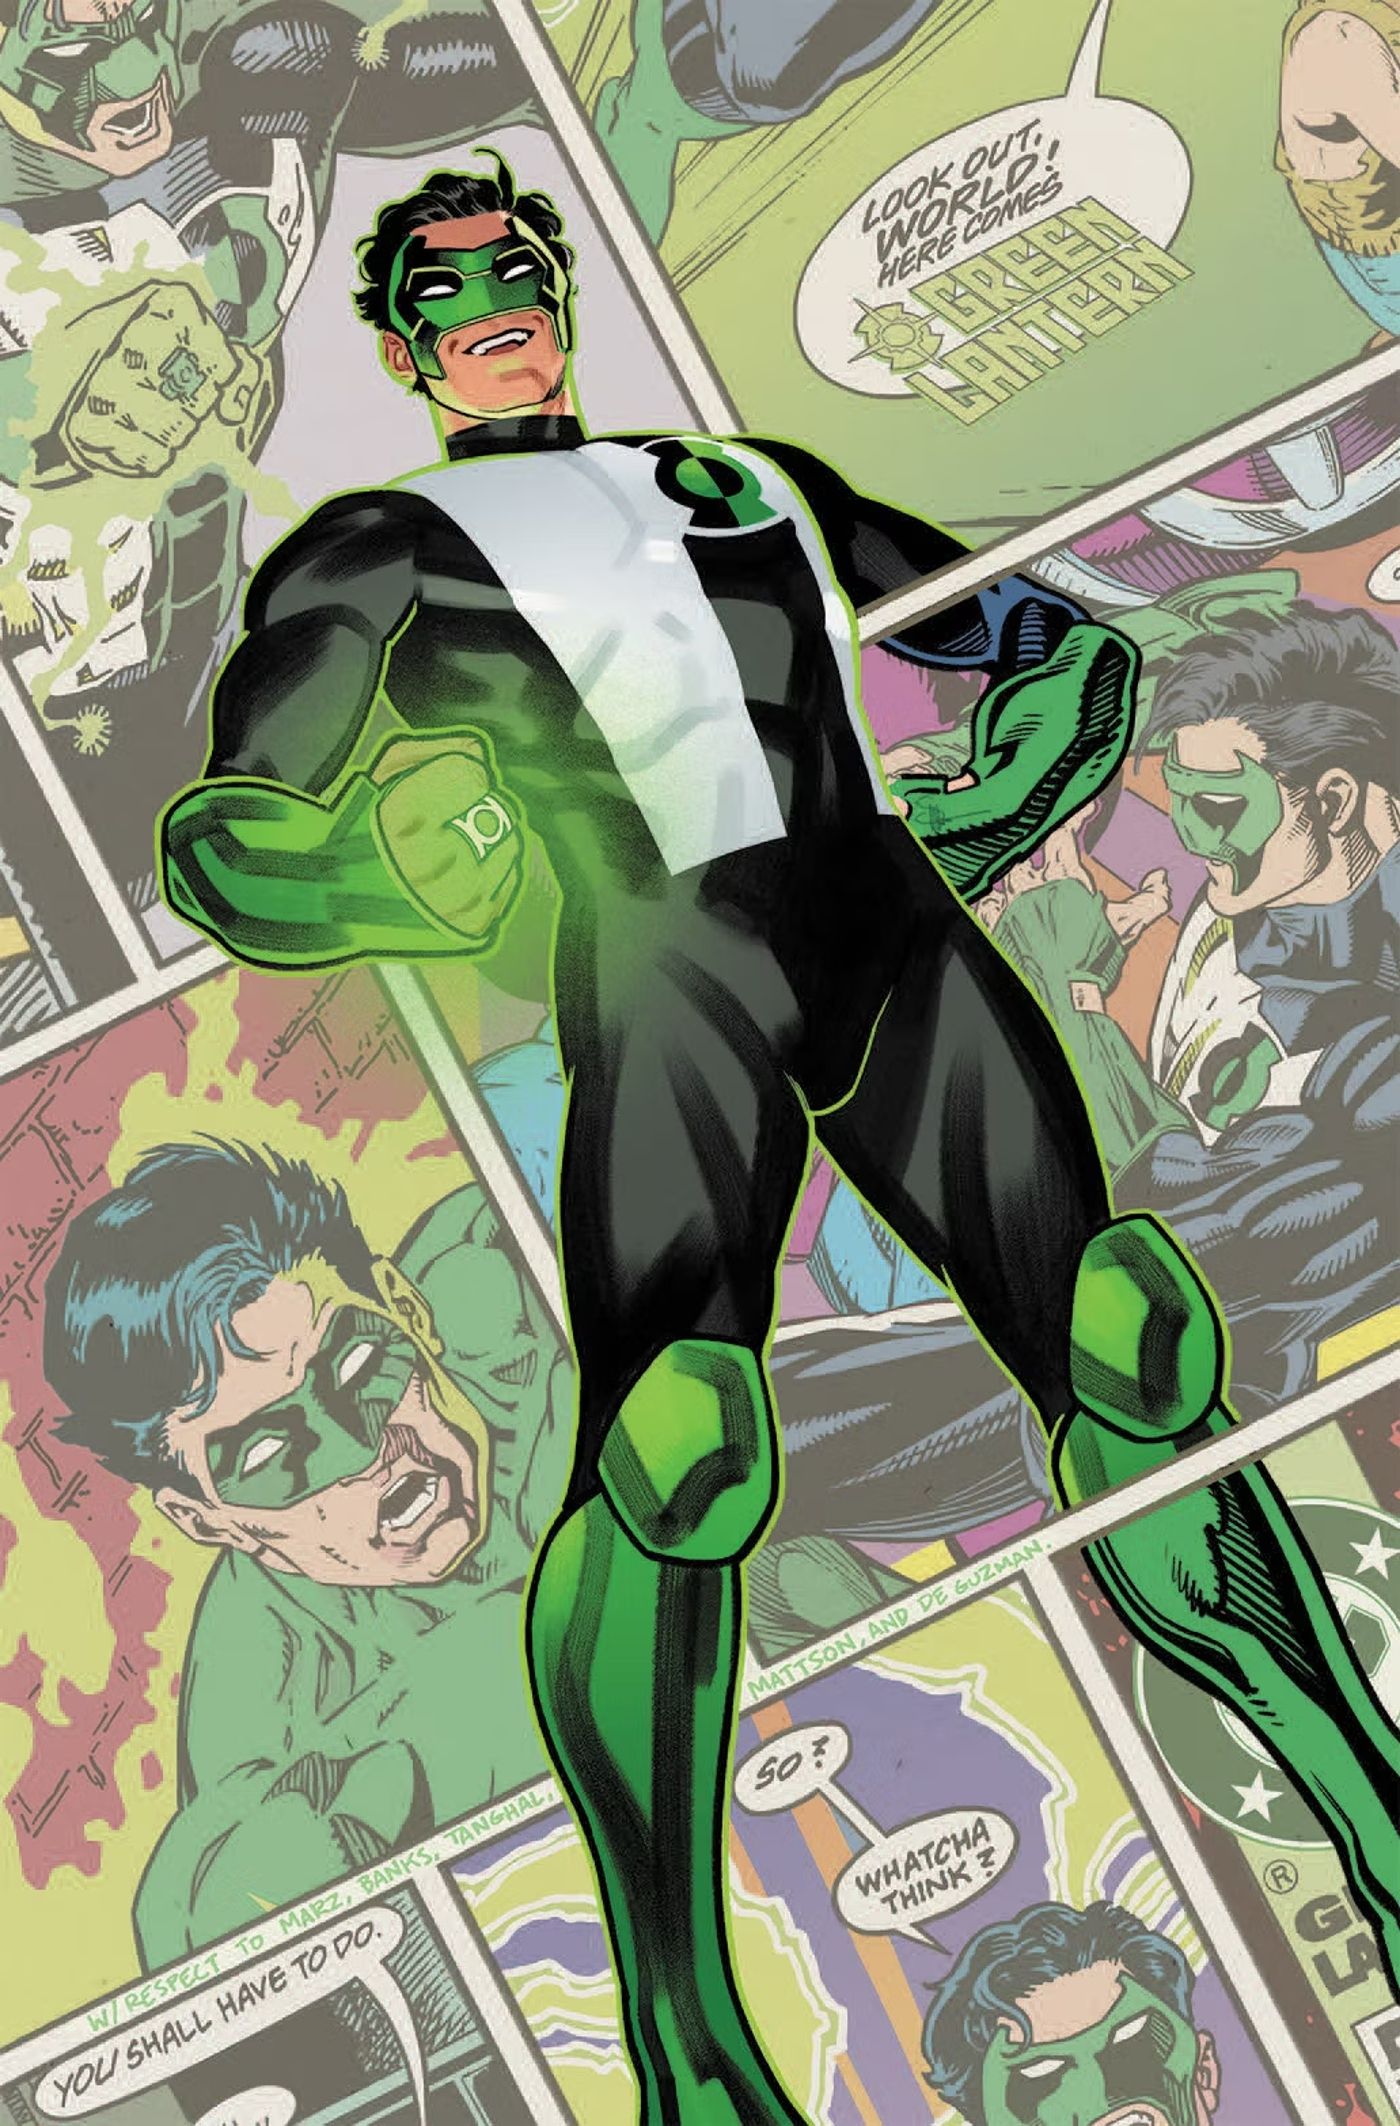 DC’s Most Underrated Green Lantern Shines in a Tribute to His ’90s Debut